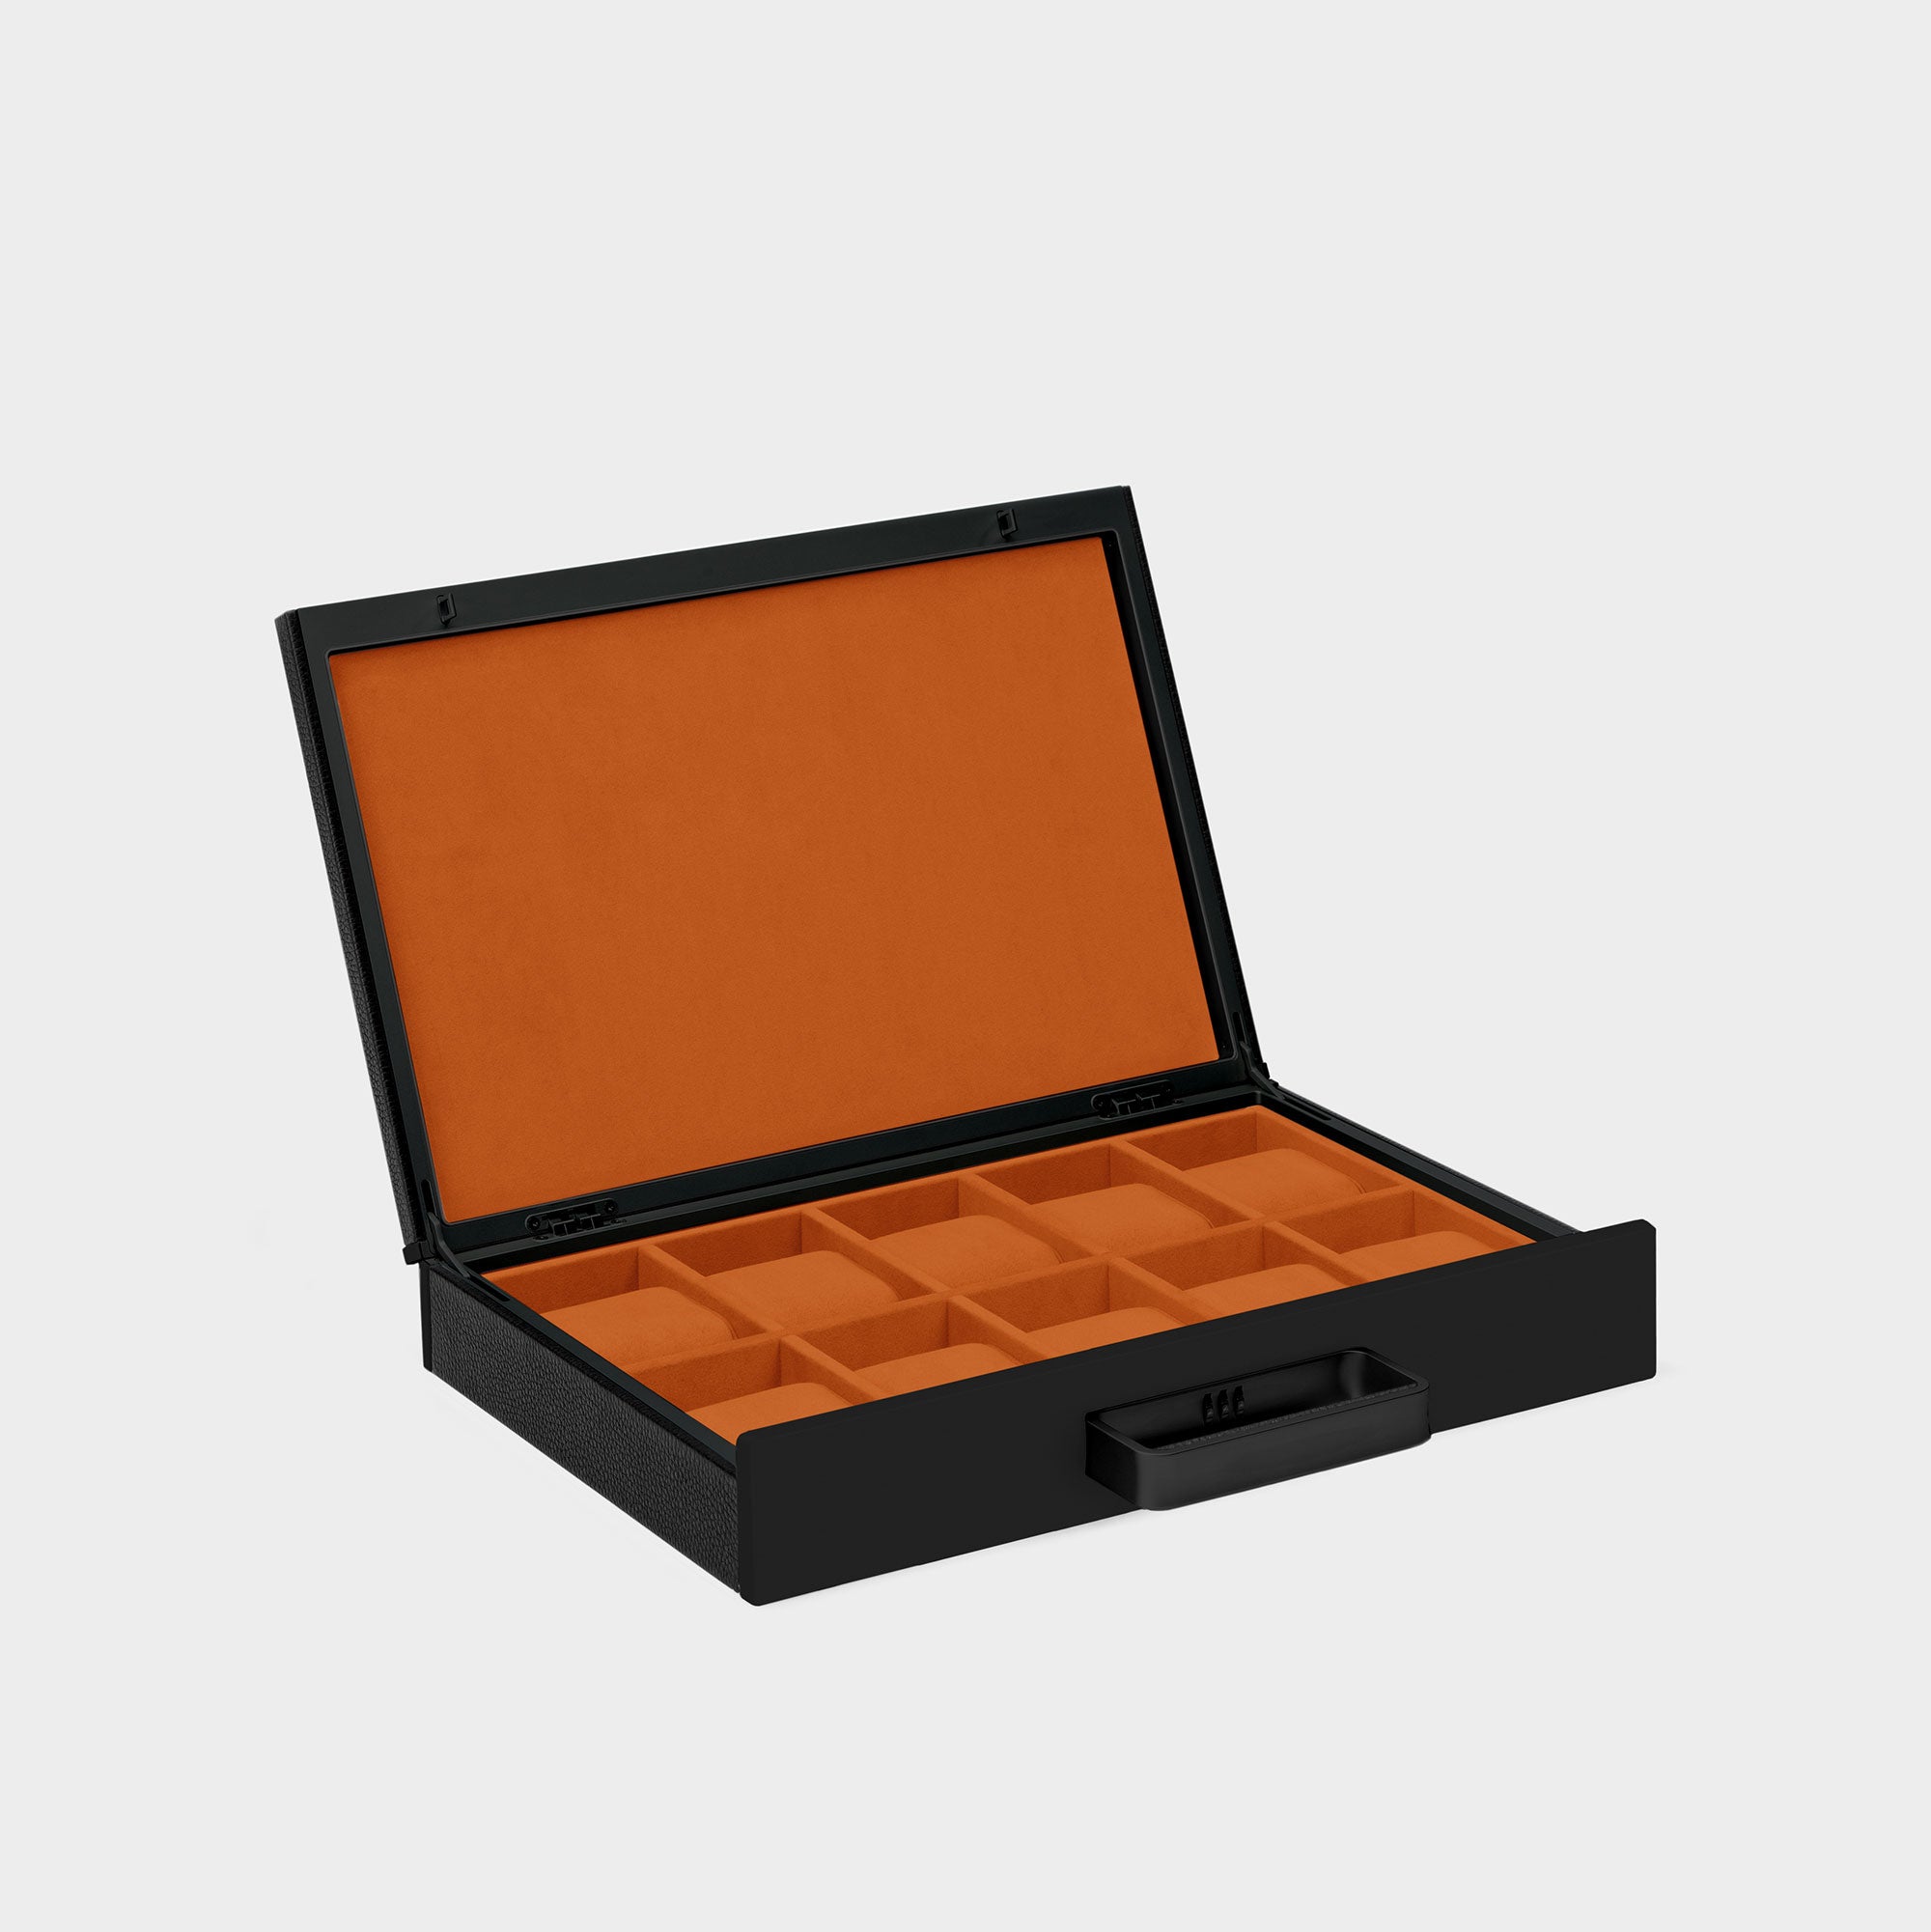 Charles Simon Mackenzie 10 luxury watch briefcase in all black with Papaya orange interior made from fine leather, aluminum and carbon fiber casing and soft Alcantara interior lining